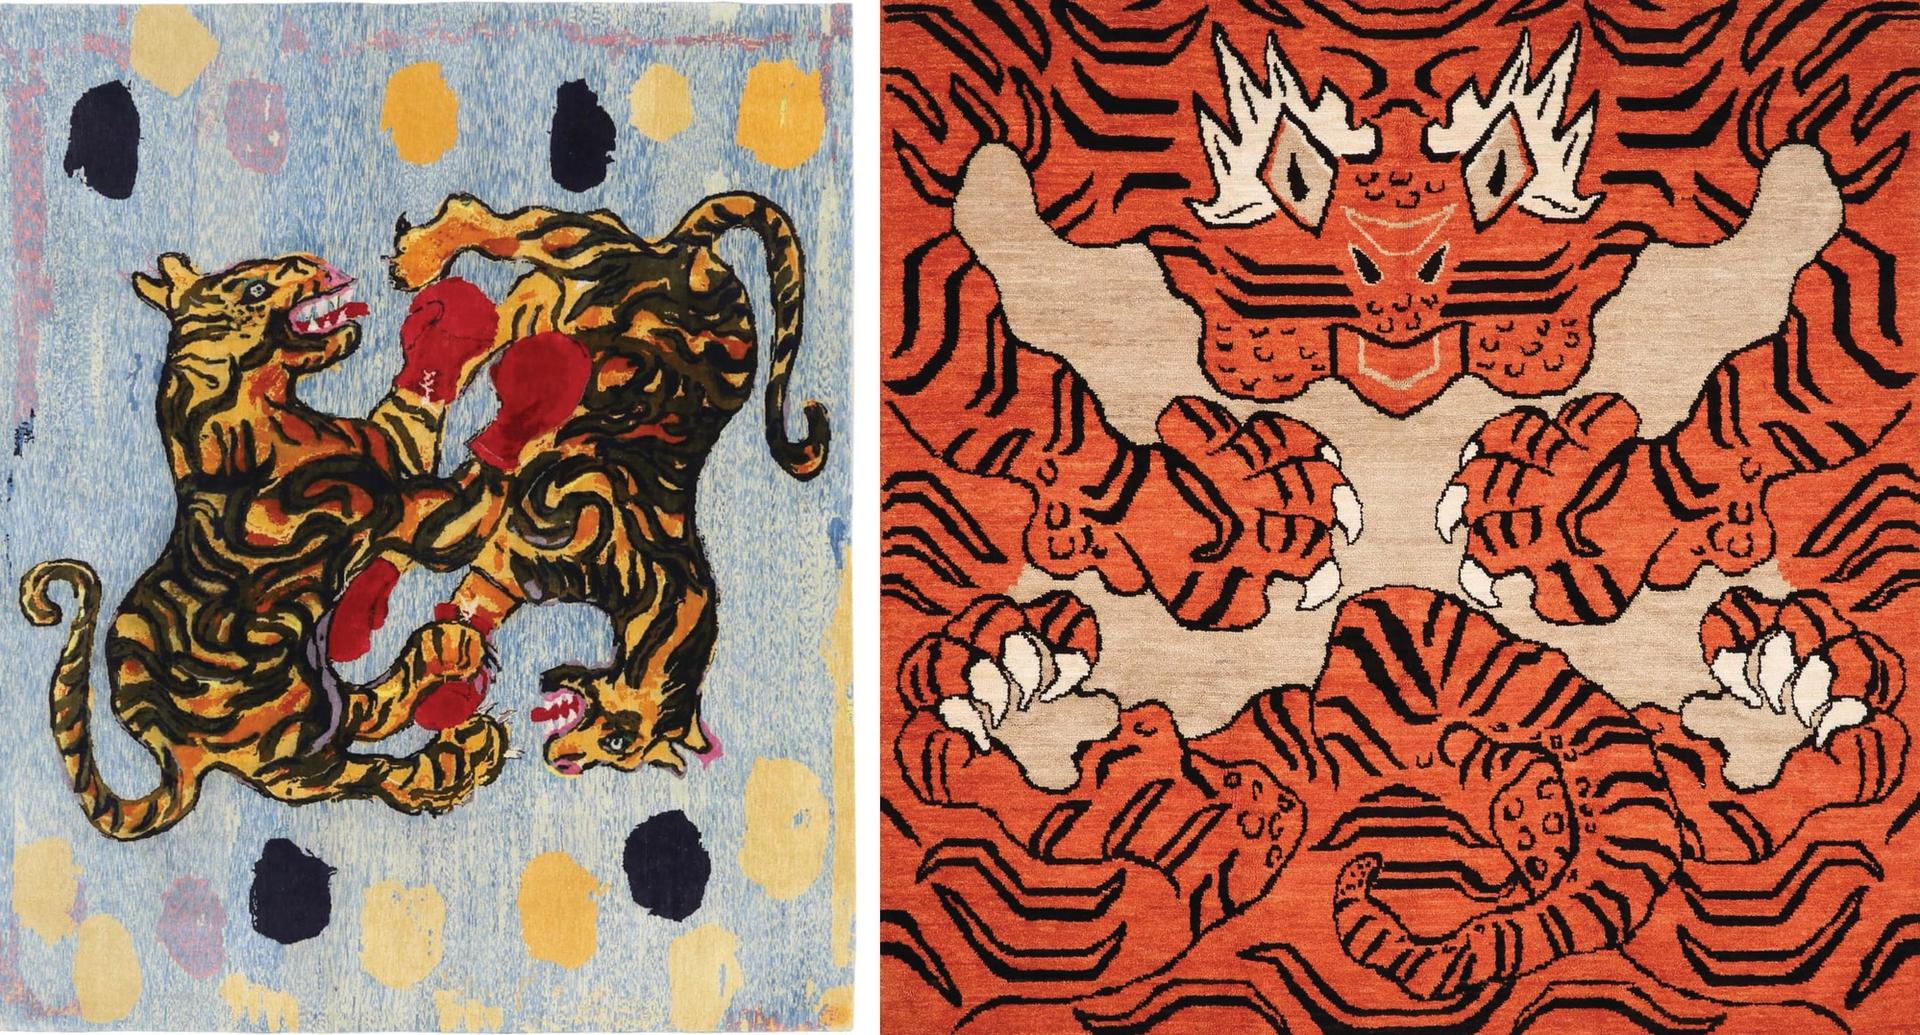 Left to right: Peter Doig's Tiger Fight (2022) and Ai Weiwei's Tyger (2022)

Courtesy of the artists